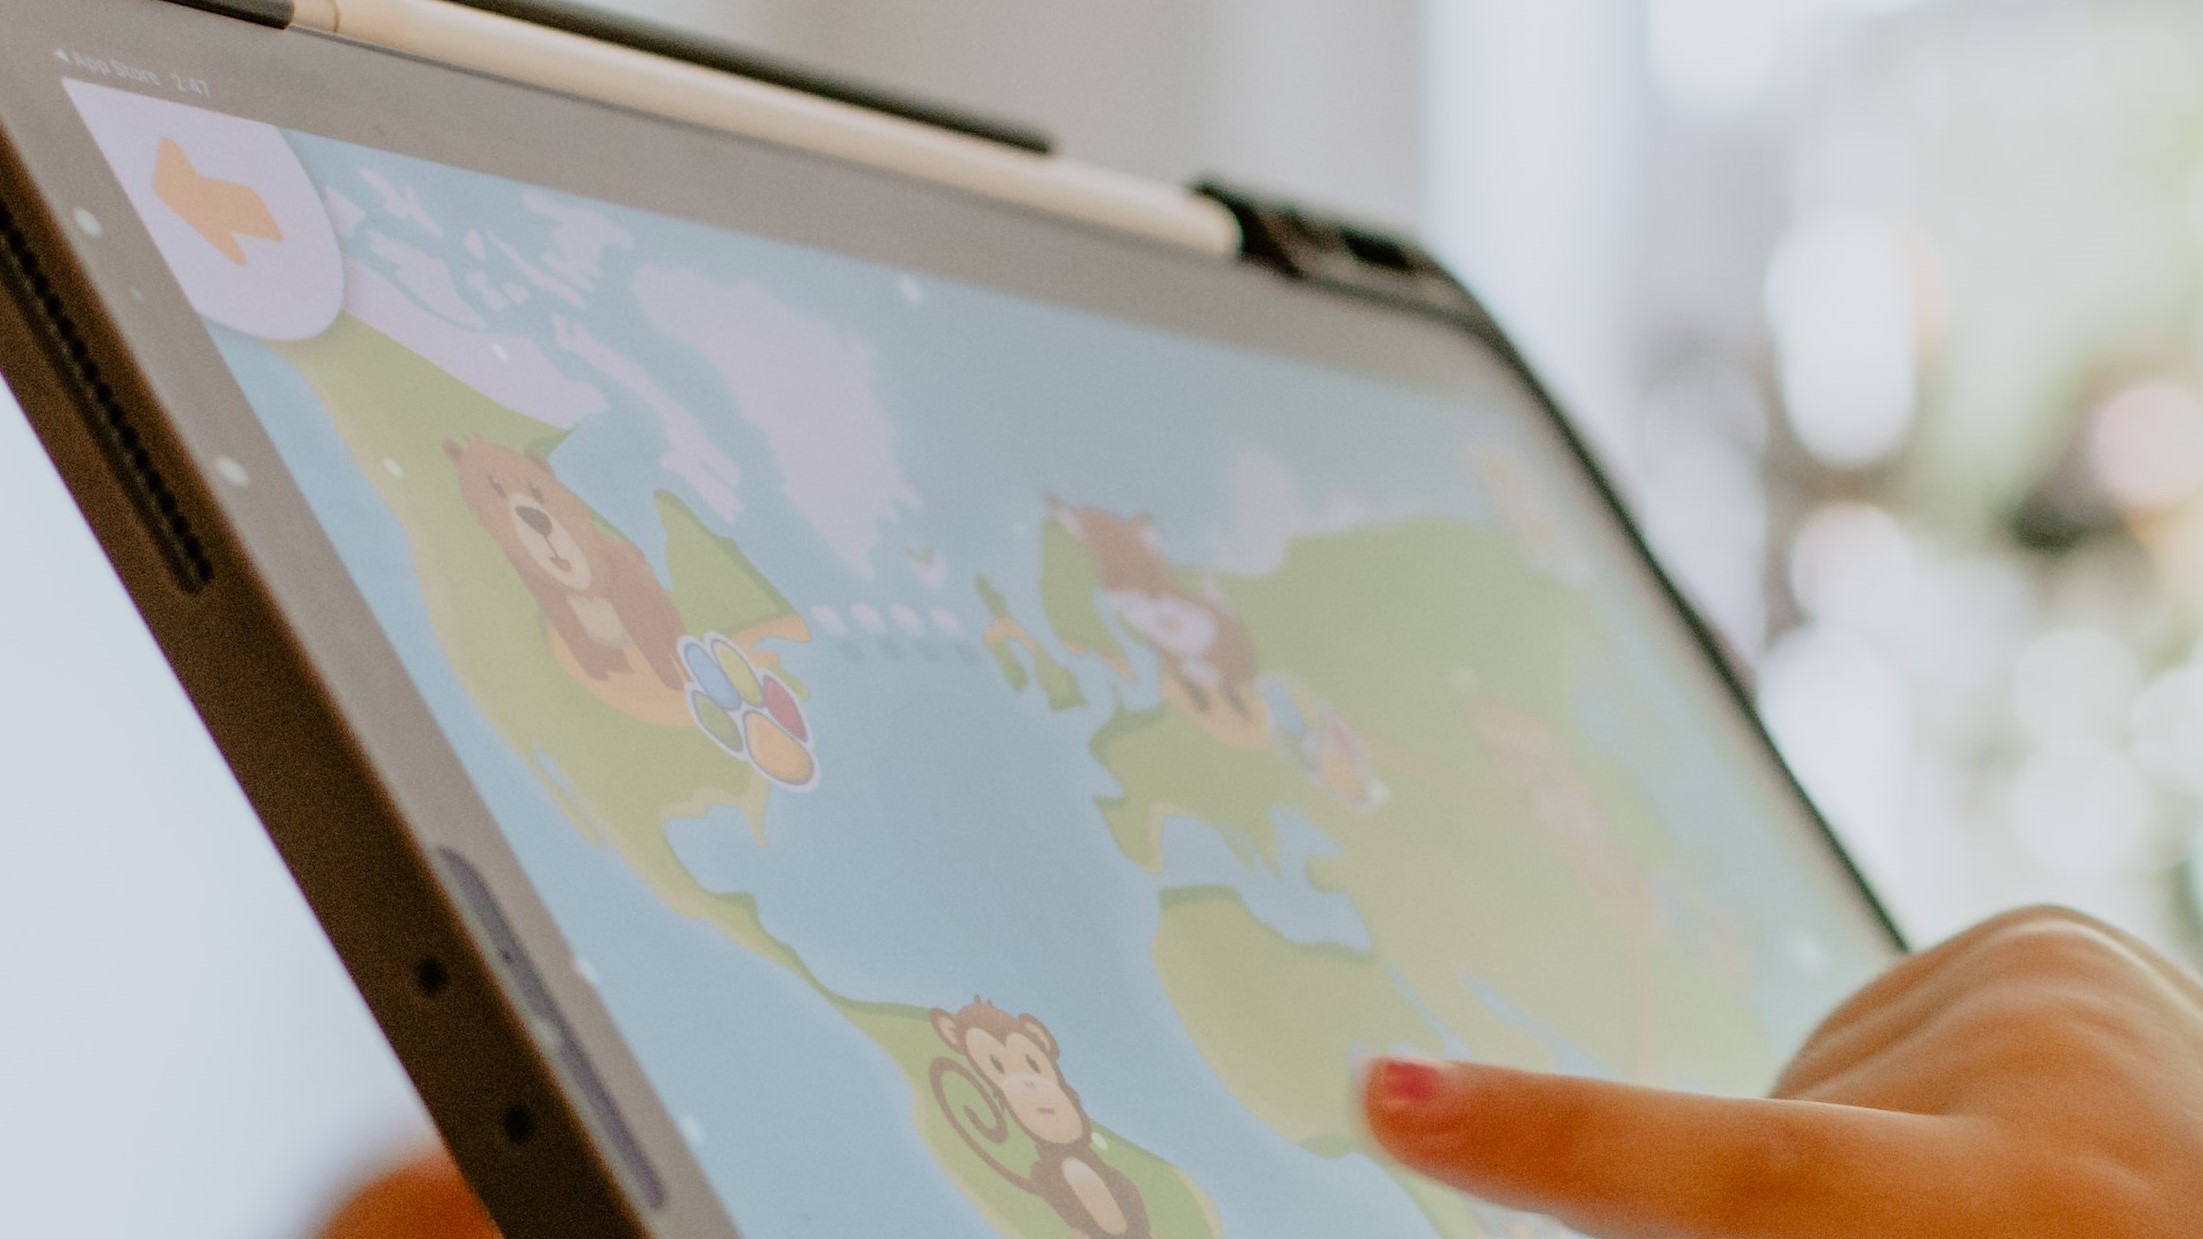 A primary school pupil points at a map on an iPad